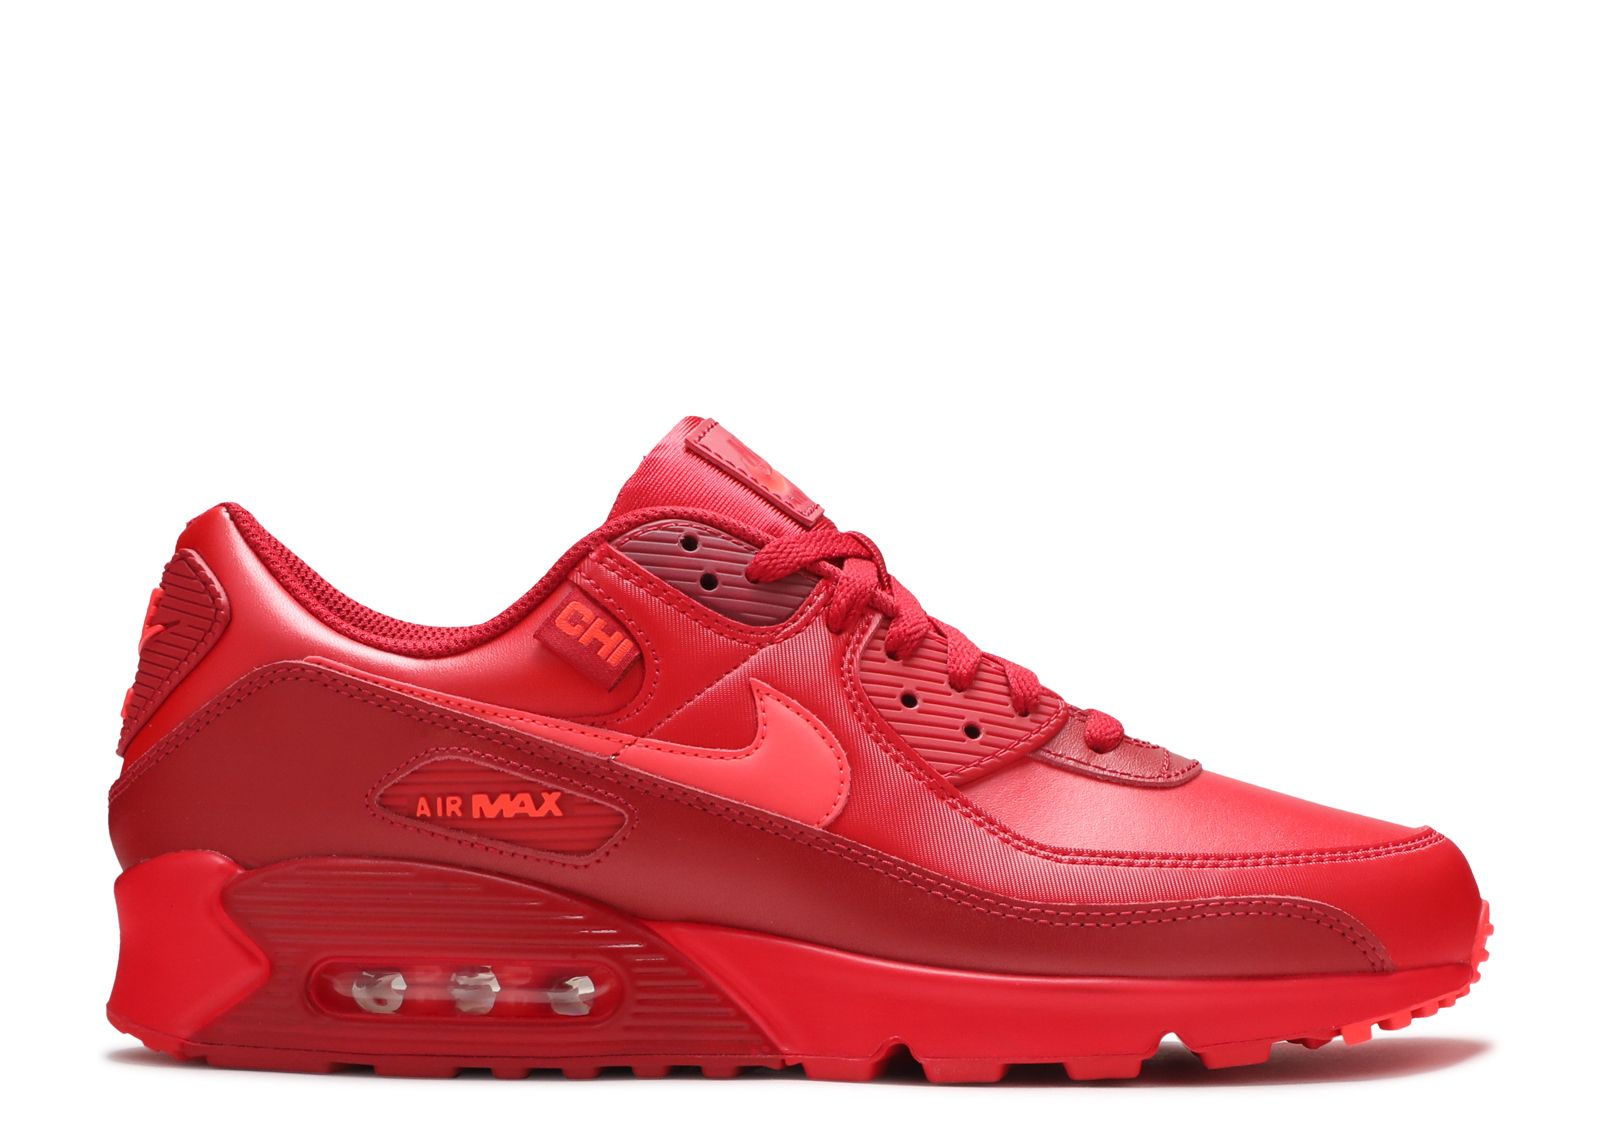 Air Max 90 'City Special Chicago' - Nike - DH0146 600 - university red ...